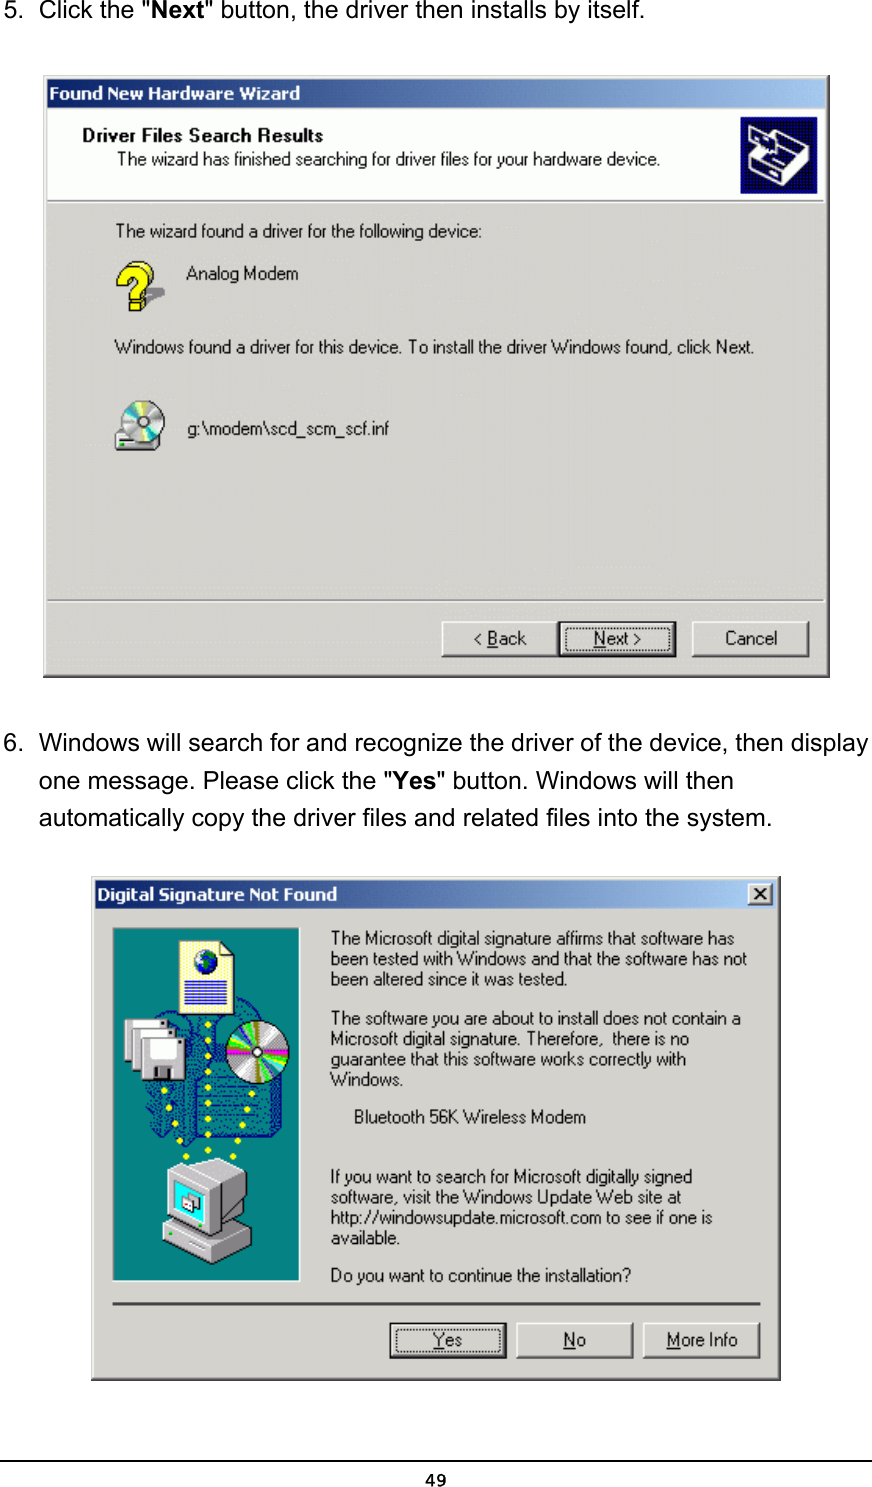   495.  Click the &quot;Next&quot; button, the driver then installs by itself.  6.  Windows will search for and recognize the driver of the device, then display one message. Please click the &quot;Yes&quot; button. Windows will then automatically copy the driver files and related files into the system.  